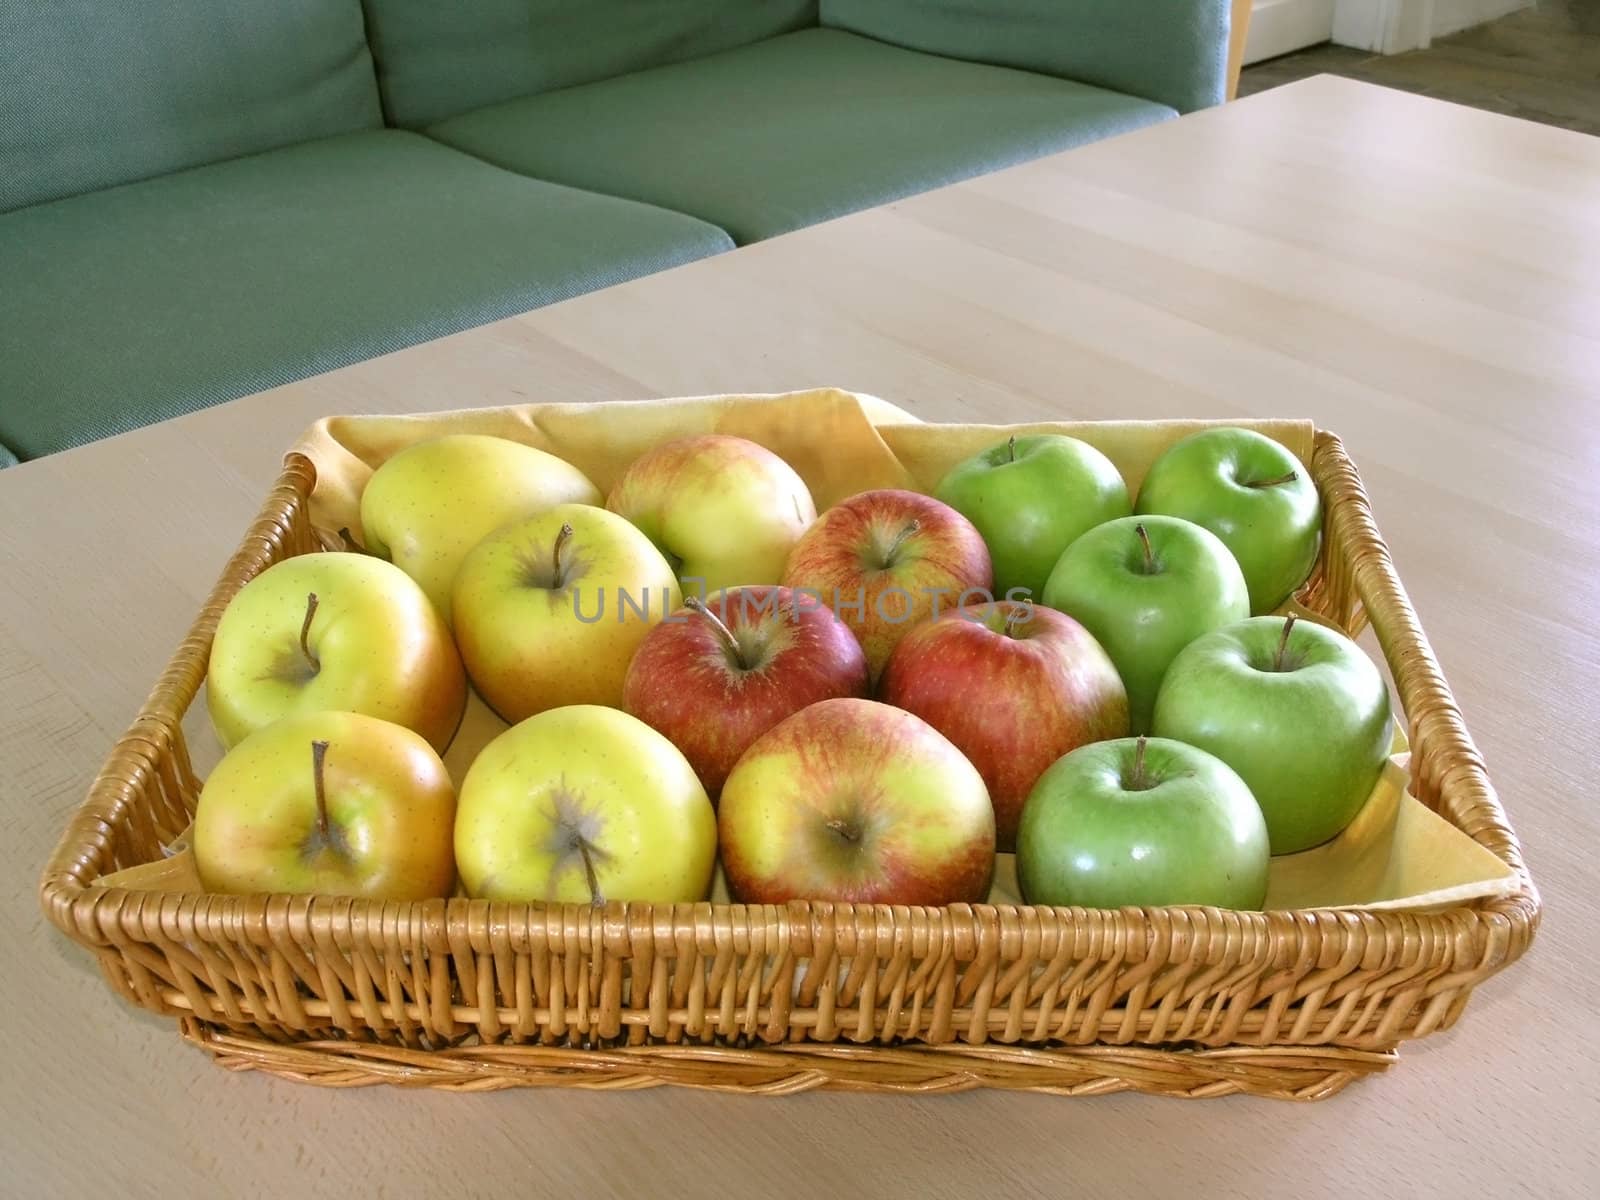 red, green and yellow apples by iwka